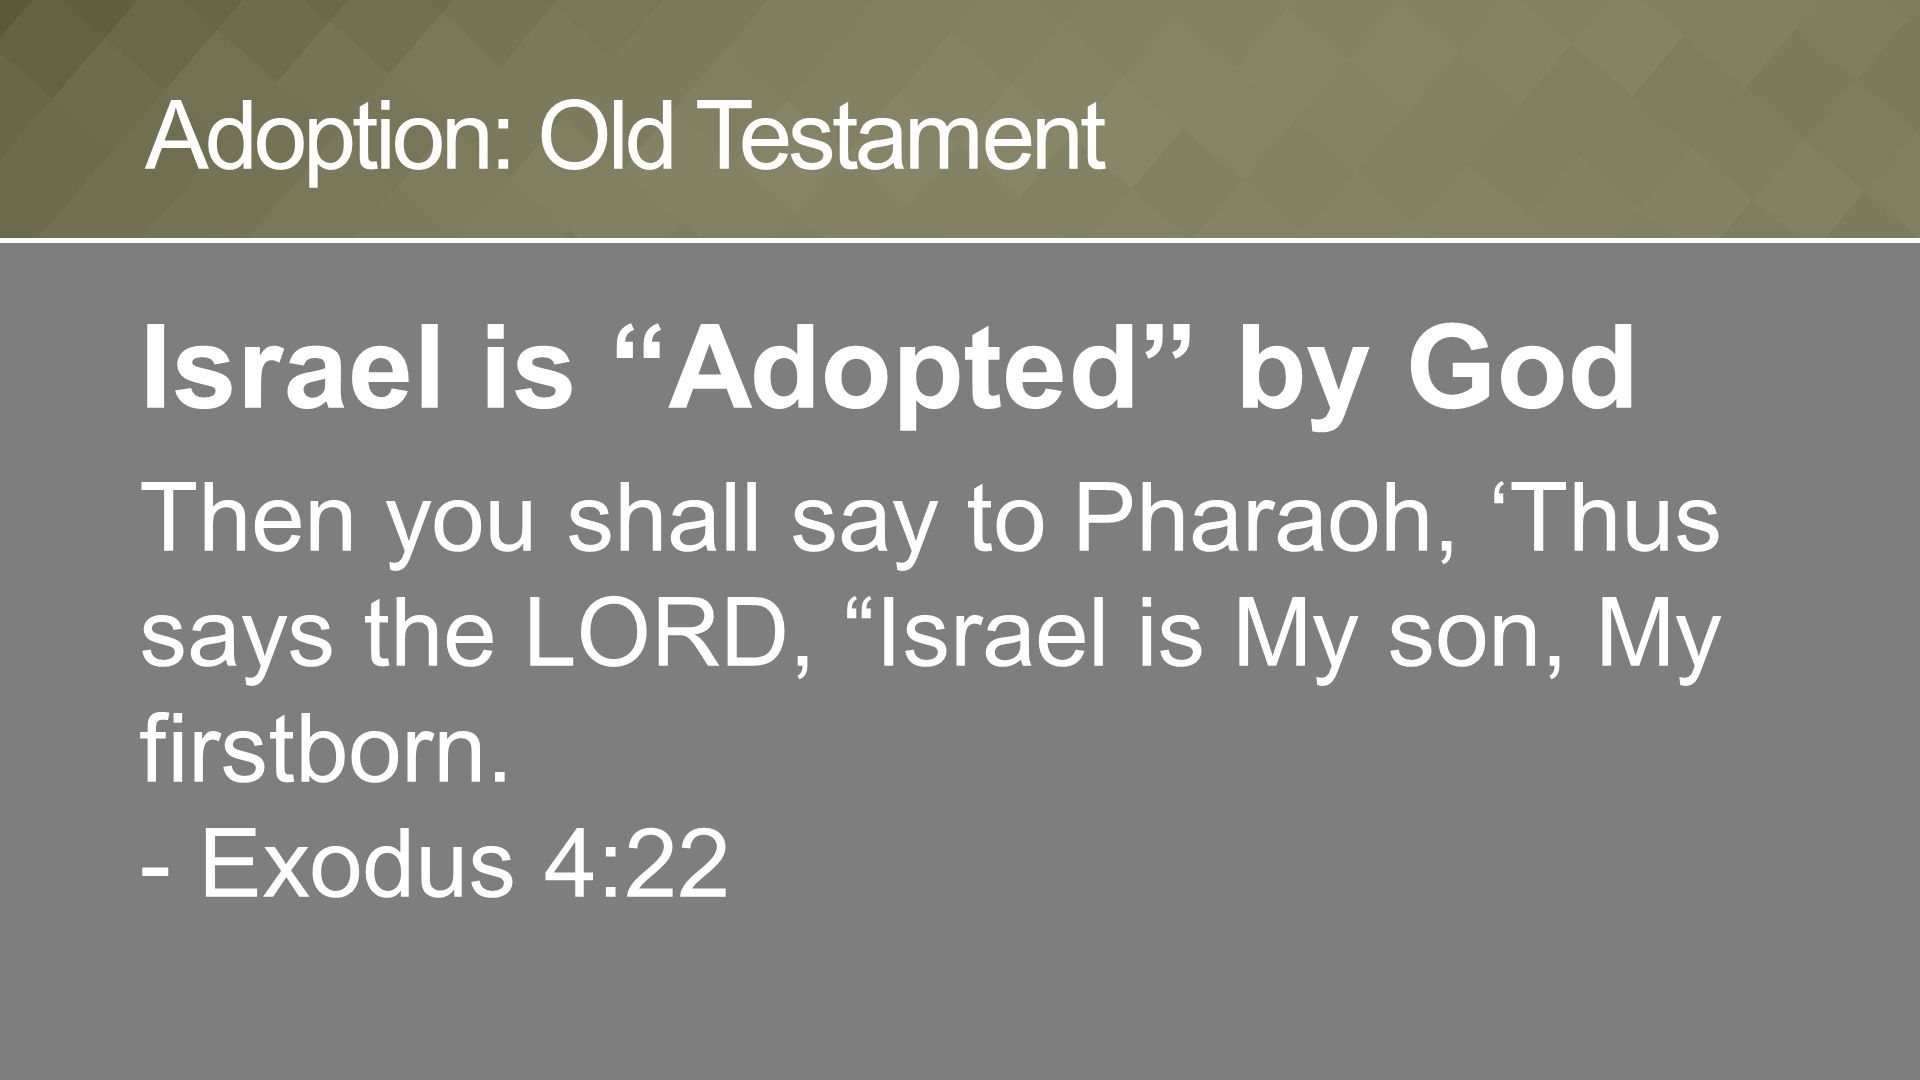 Israel is Adopted by God Then you shall say to Pharaoh, ‘Thus says the LORD, Israel is My son, My firstborn.